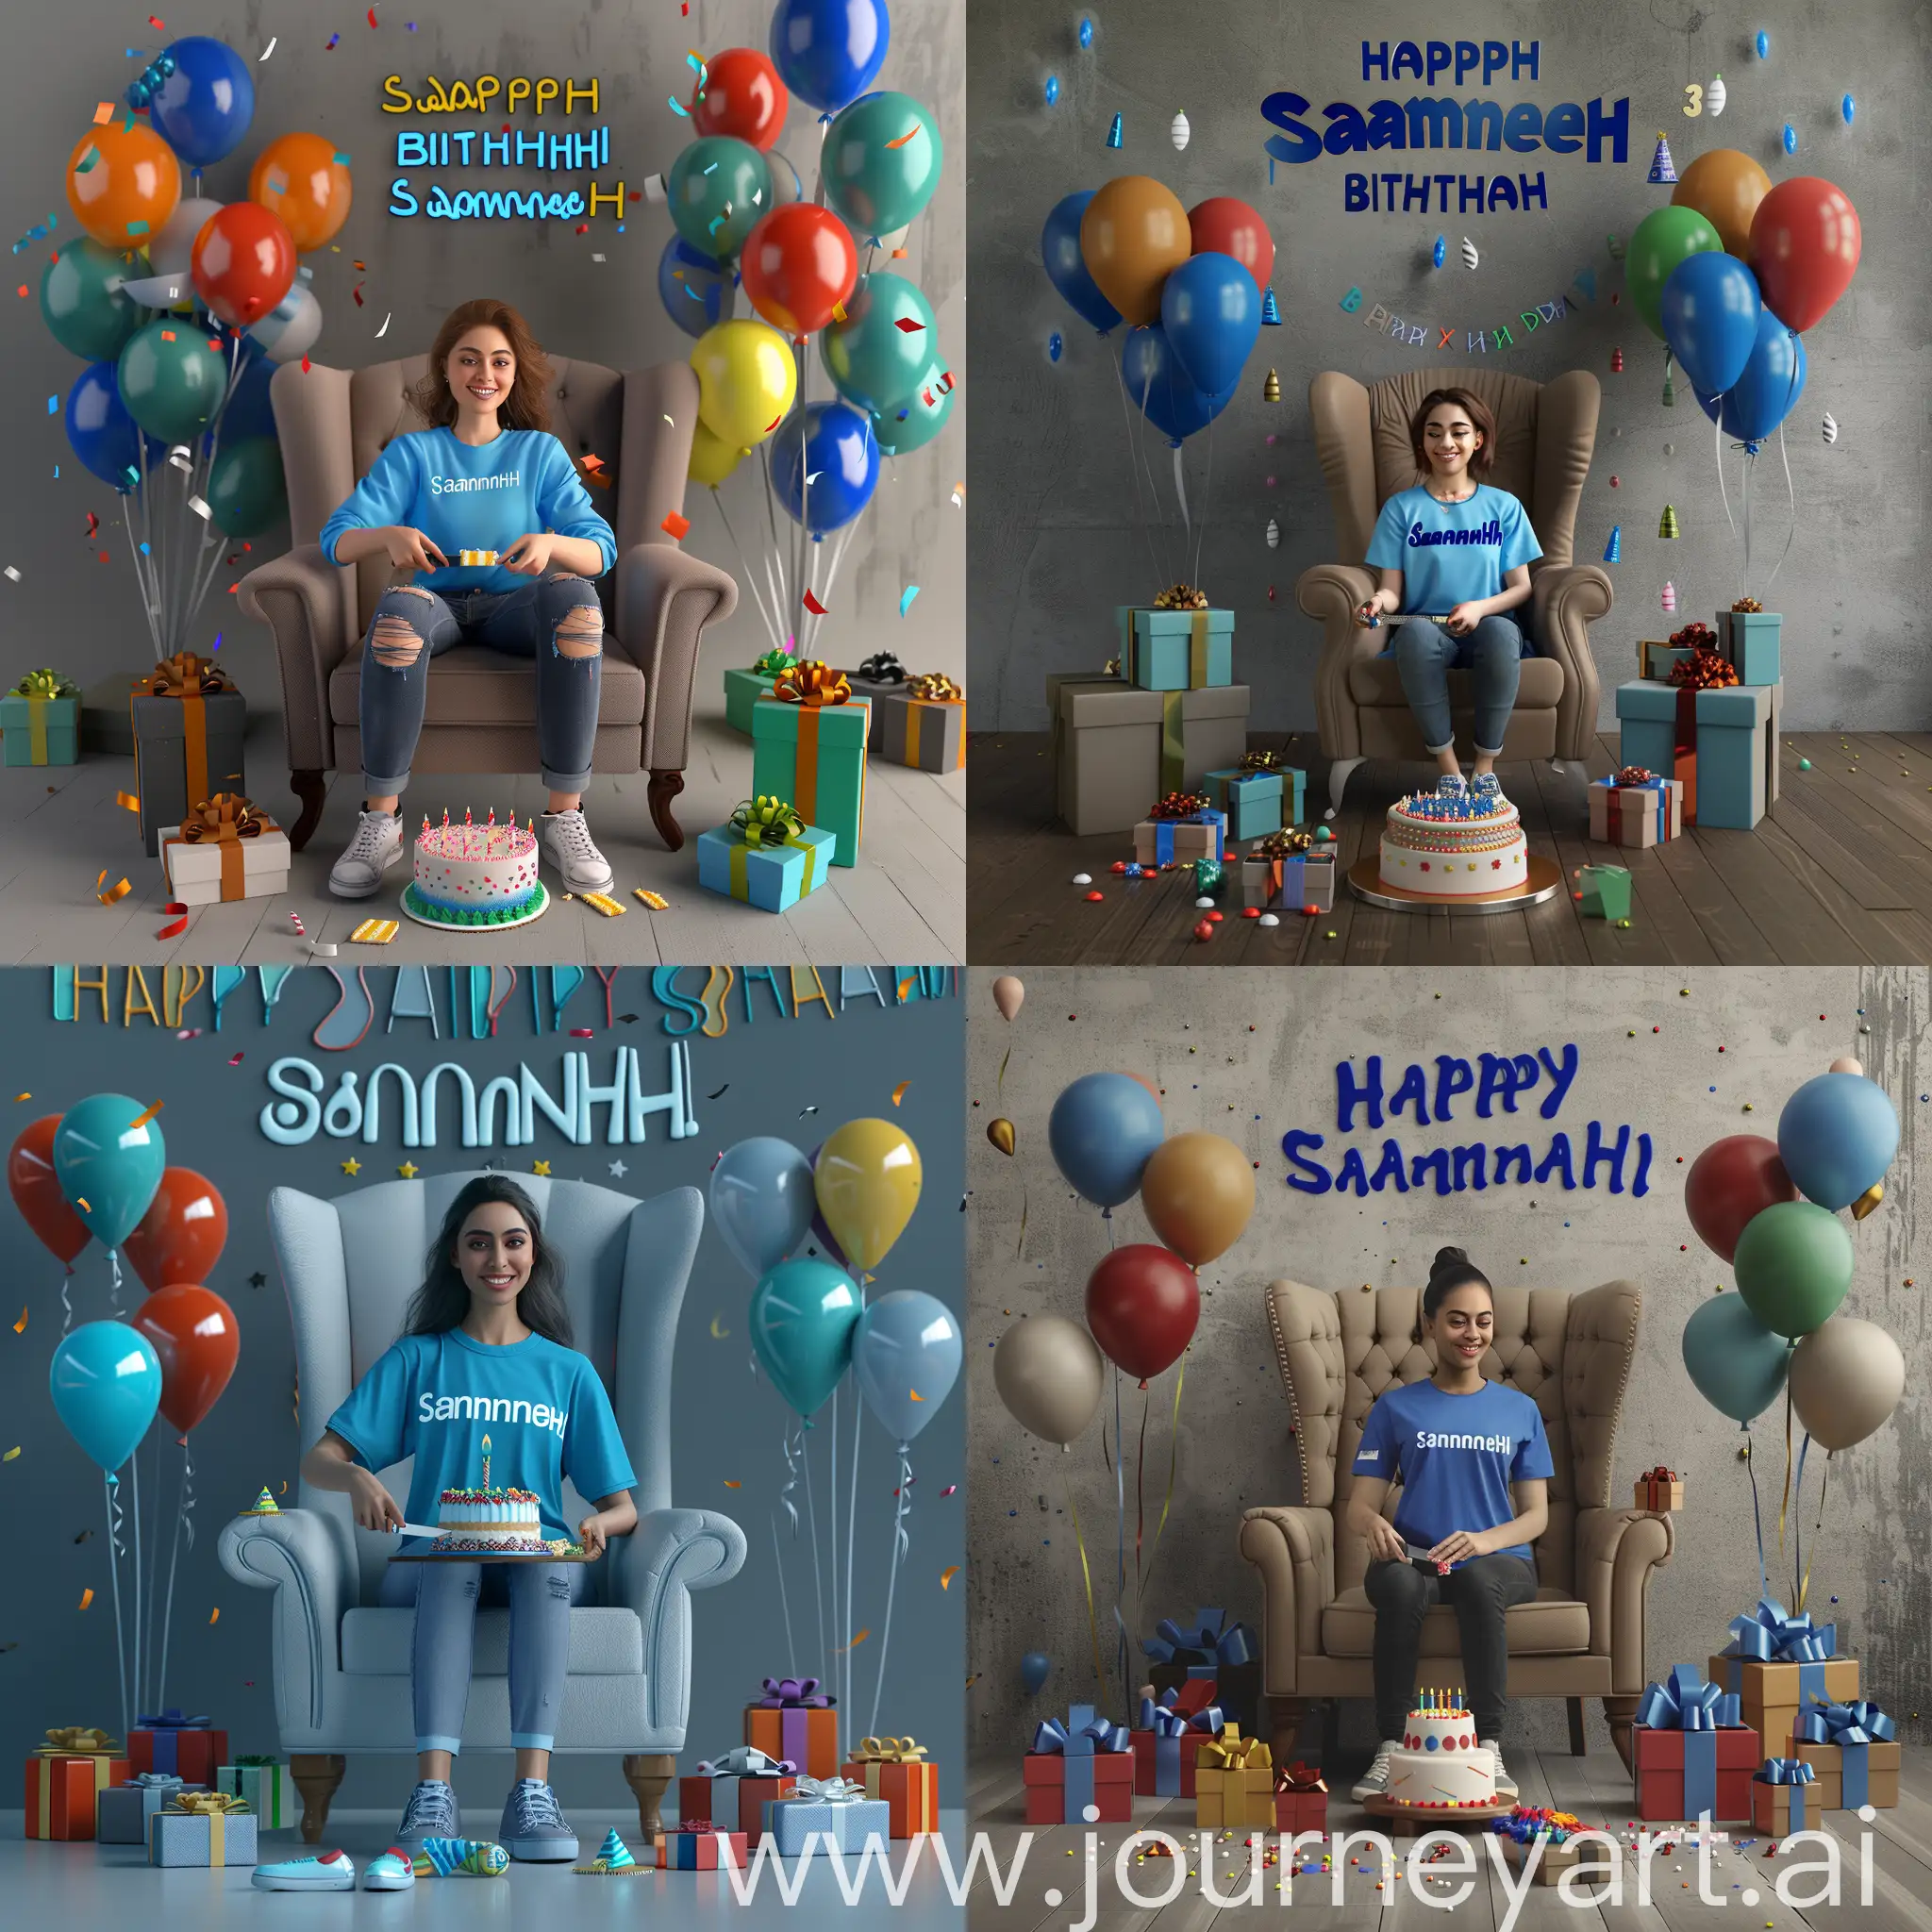 a 3D illusion for a profile picture where a 30 year old Beauty Girl is cutting her birthday cake facing forward in smiling face eye on camera, Blue shirt Sitting casually on a Wingback Chair There are gifts lying on the ground along both sides of the chair. Wearing sneakers, and the cake is lying in front, my username "Samaneh" written on the cake, in my background HAPPY BIRTHDAY SAMANEH written with Blue Colors, with balloons in different colors attached on the Gray wall